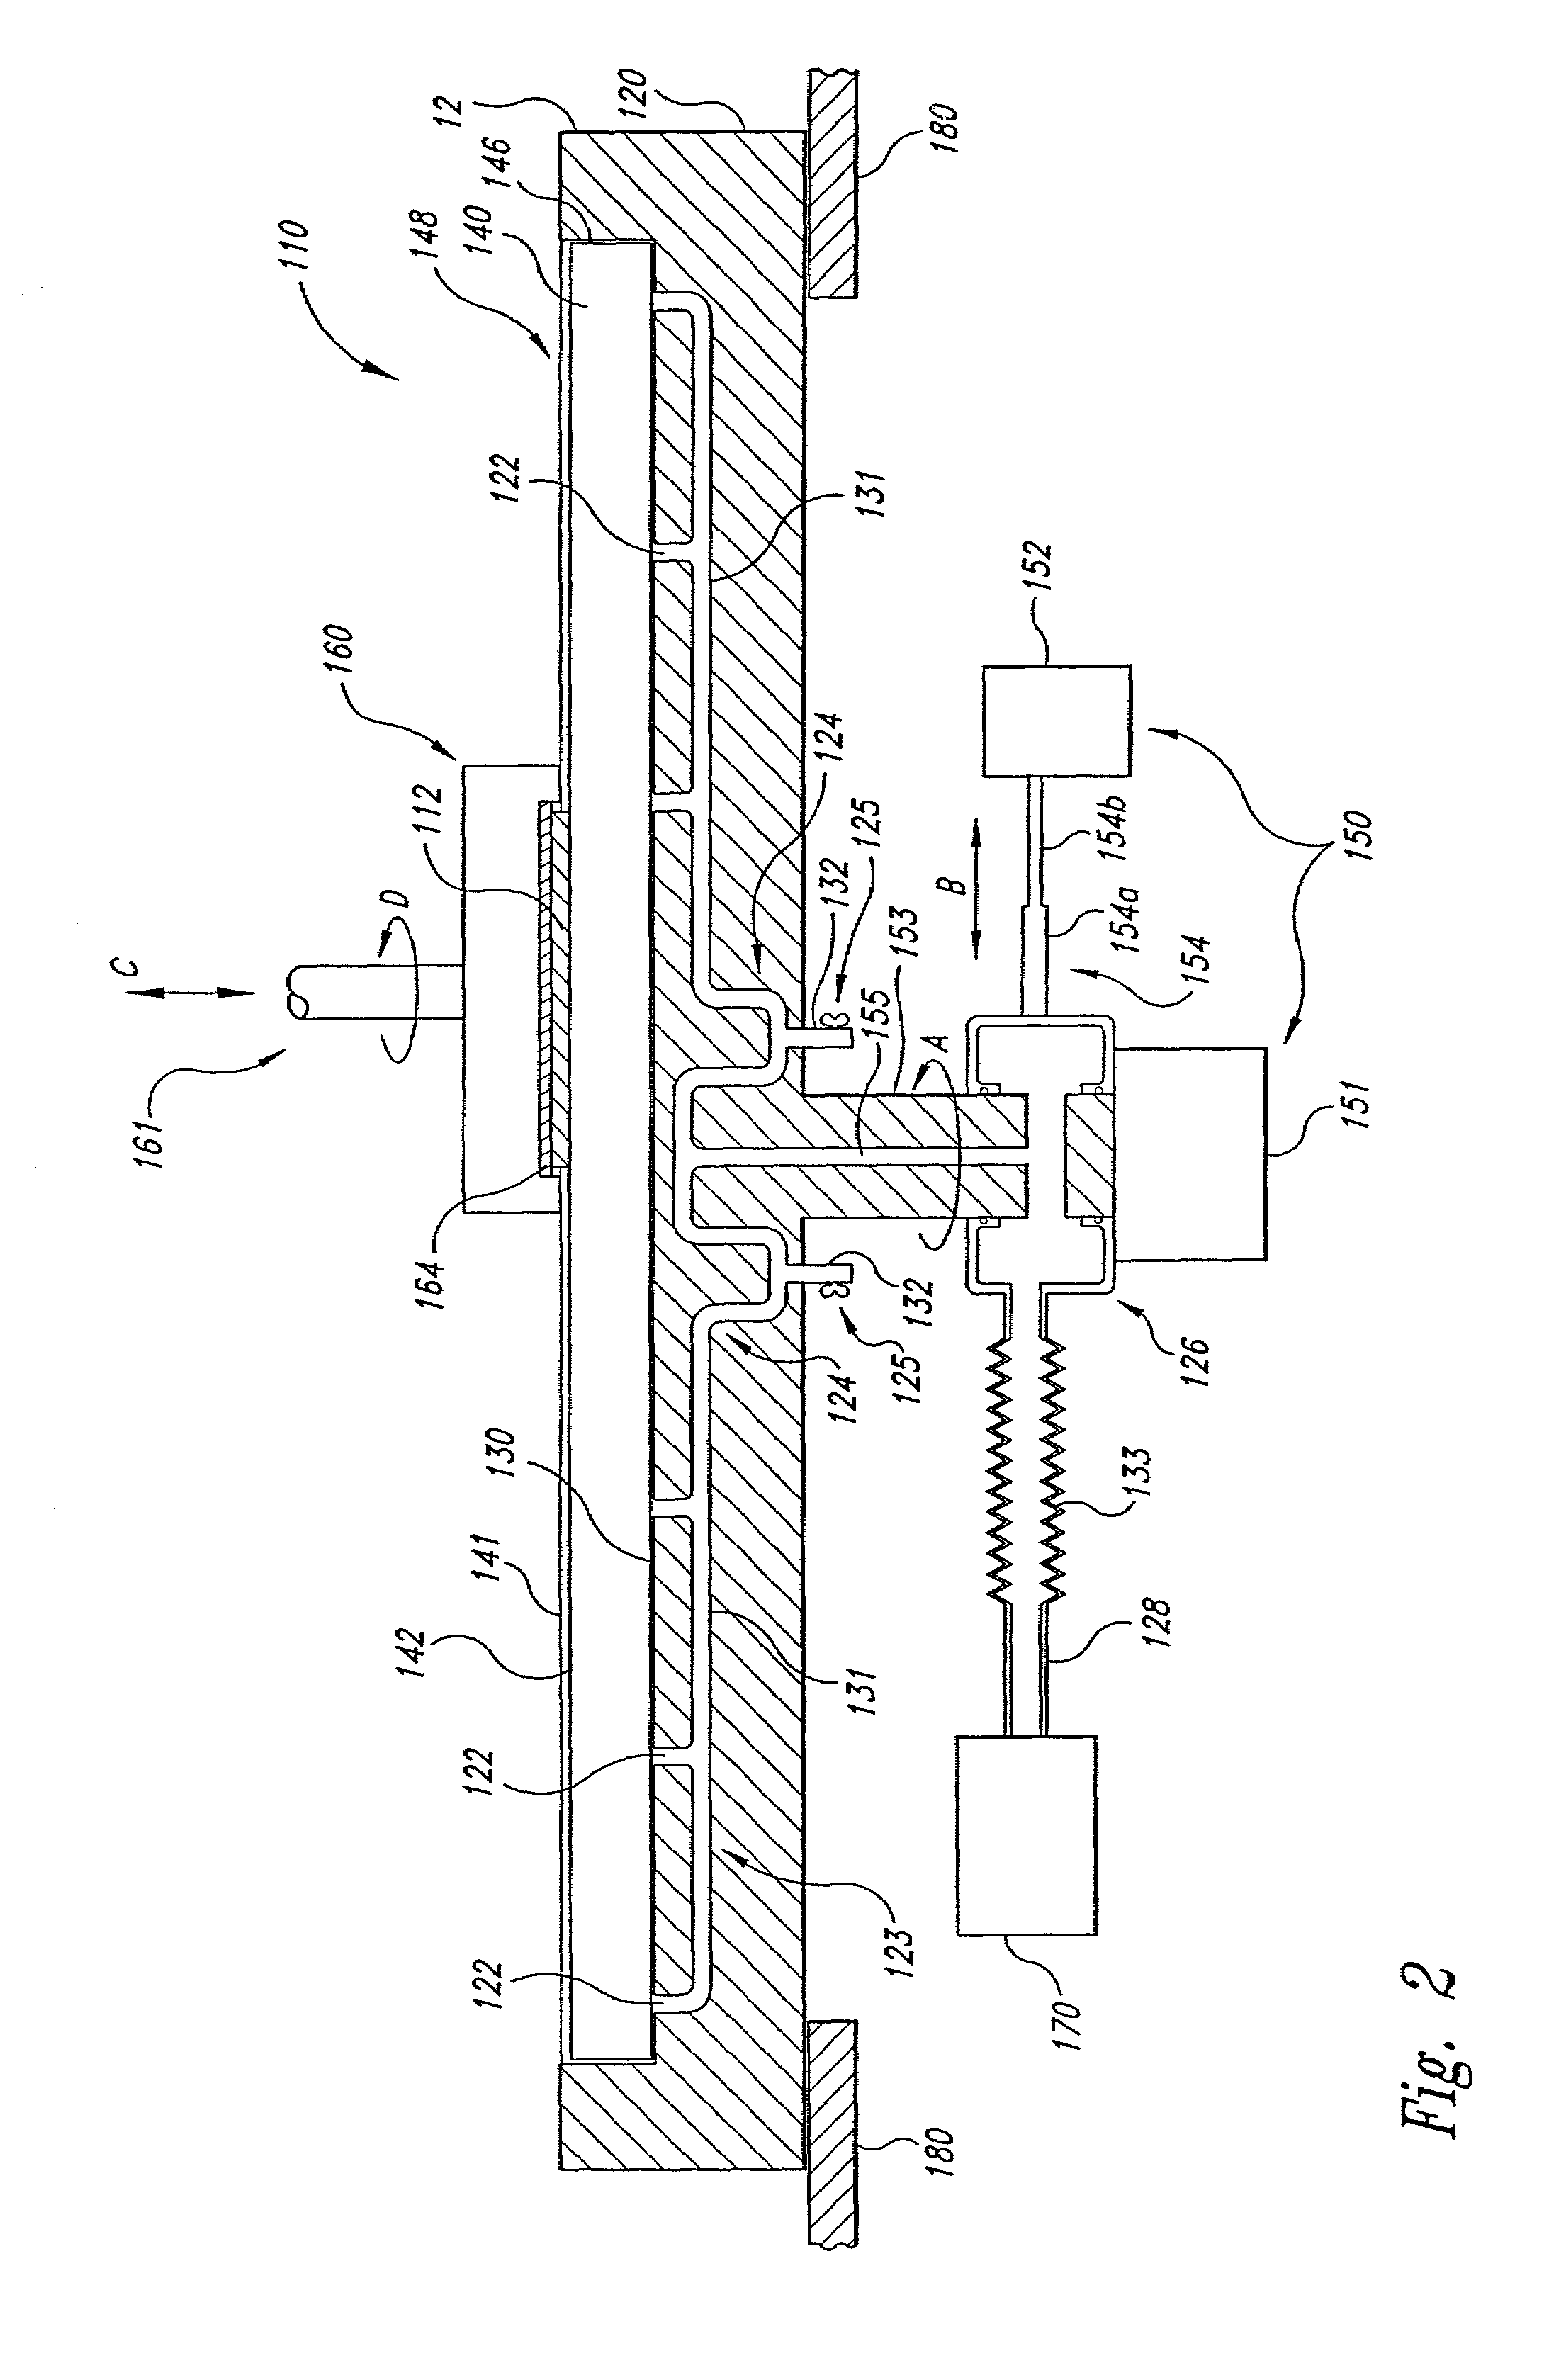 Method and apparatus for releasably attaching a polishing pad to a chemical-mechanical planarization machine